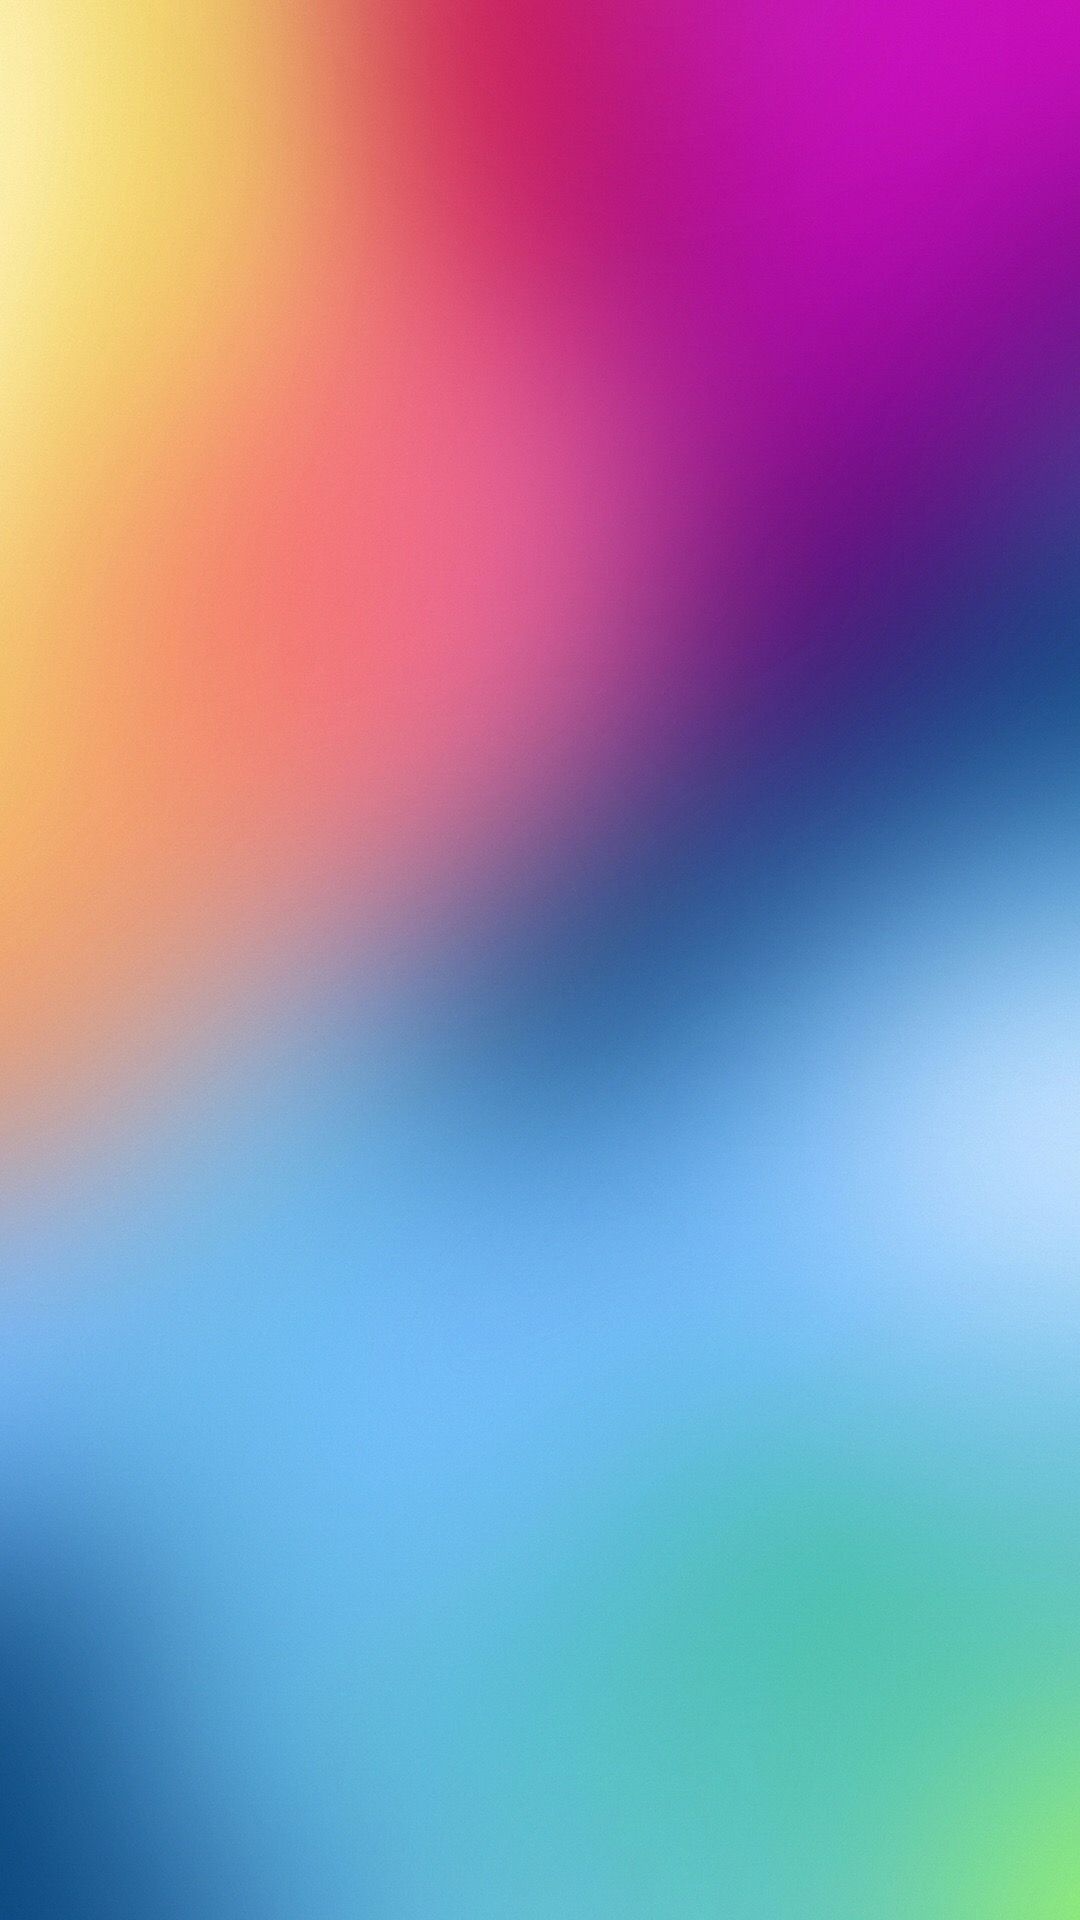 Backdrop: Gradient, Colorfulness, Smooth transition, Purple, Blue, Yellow, Orange. 1080x1920 Full HD Background.